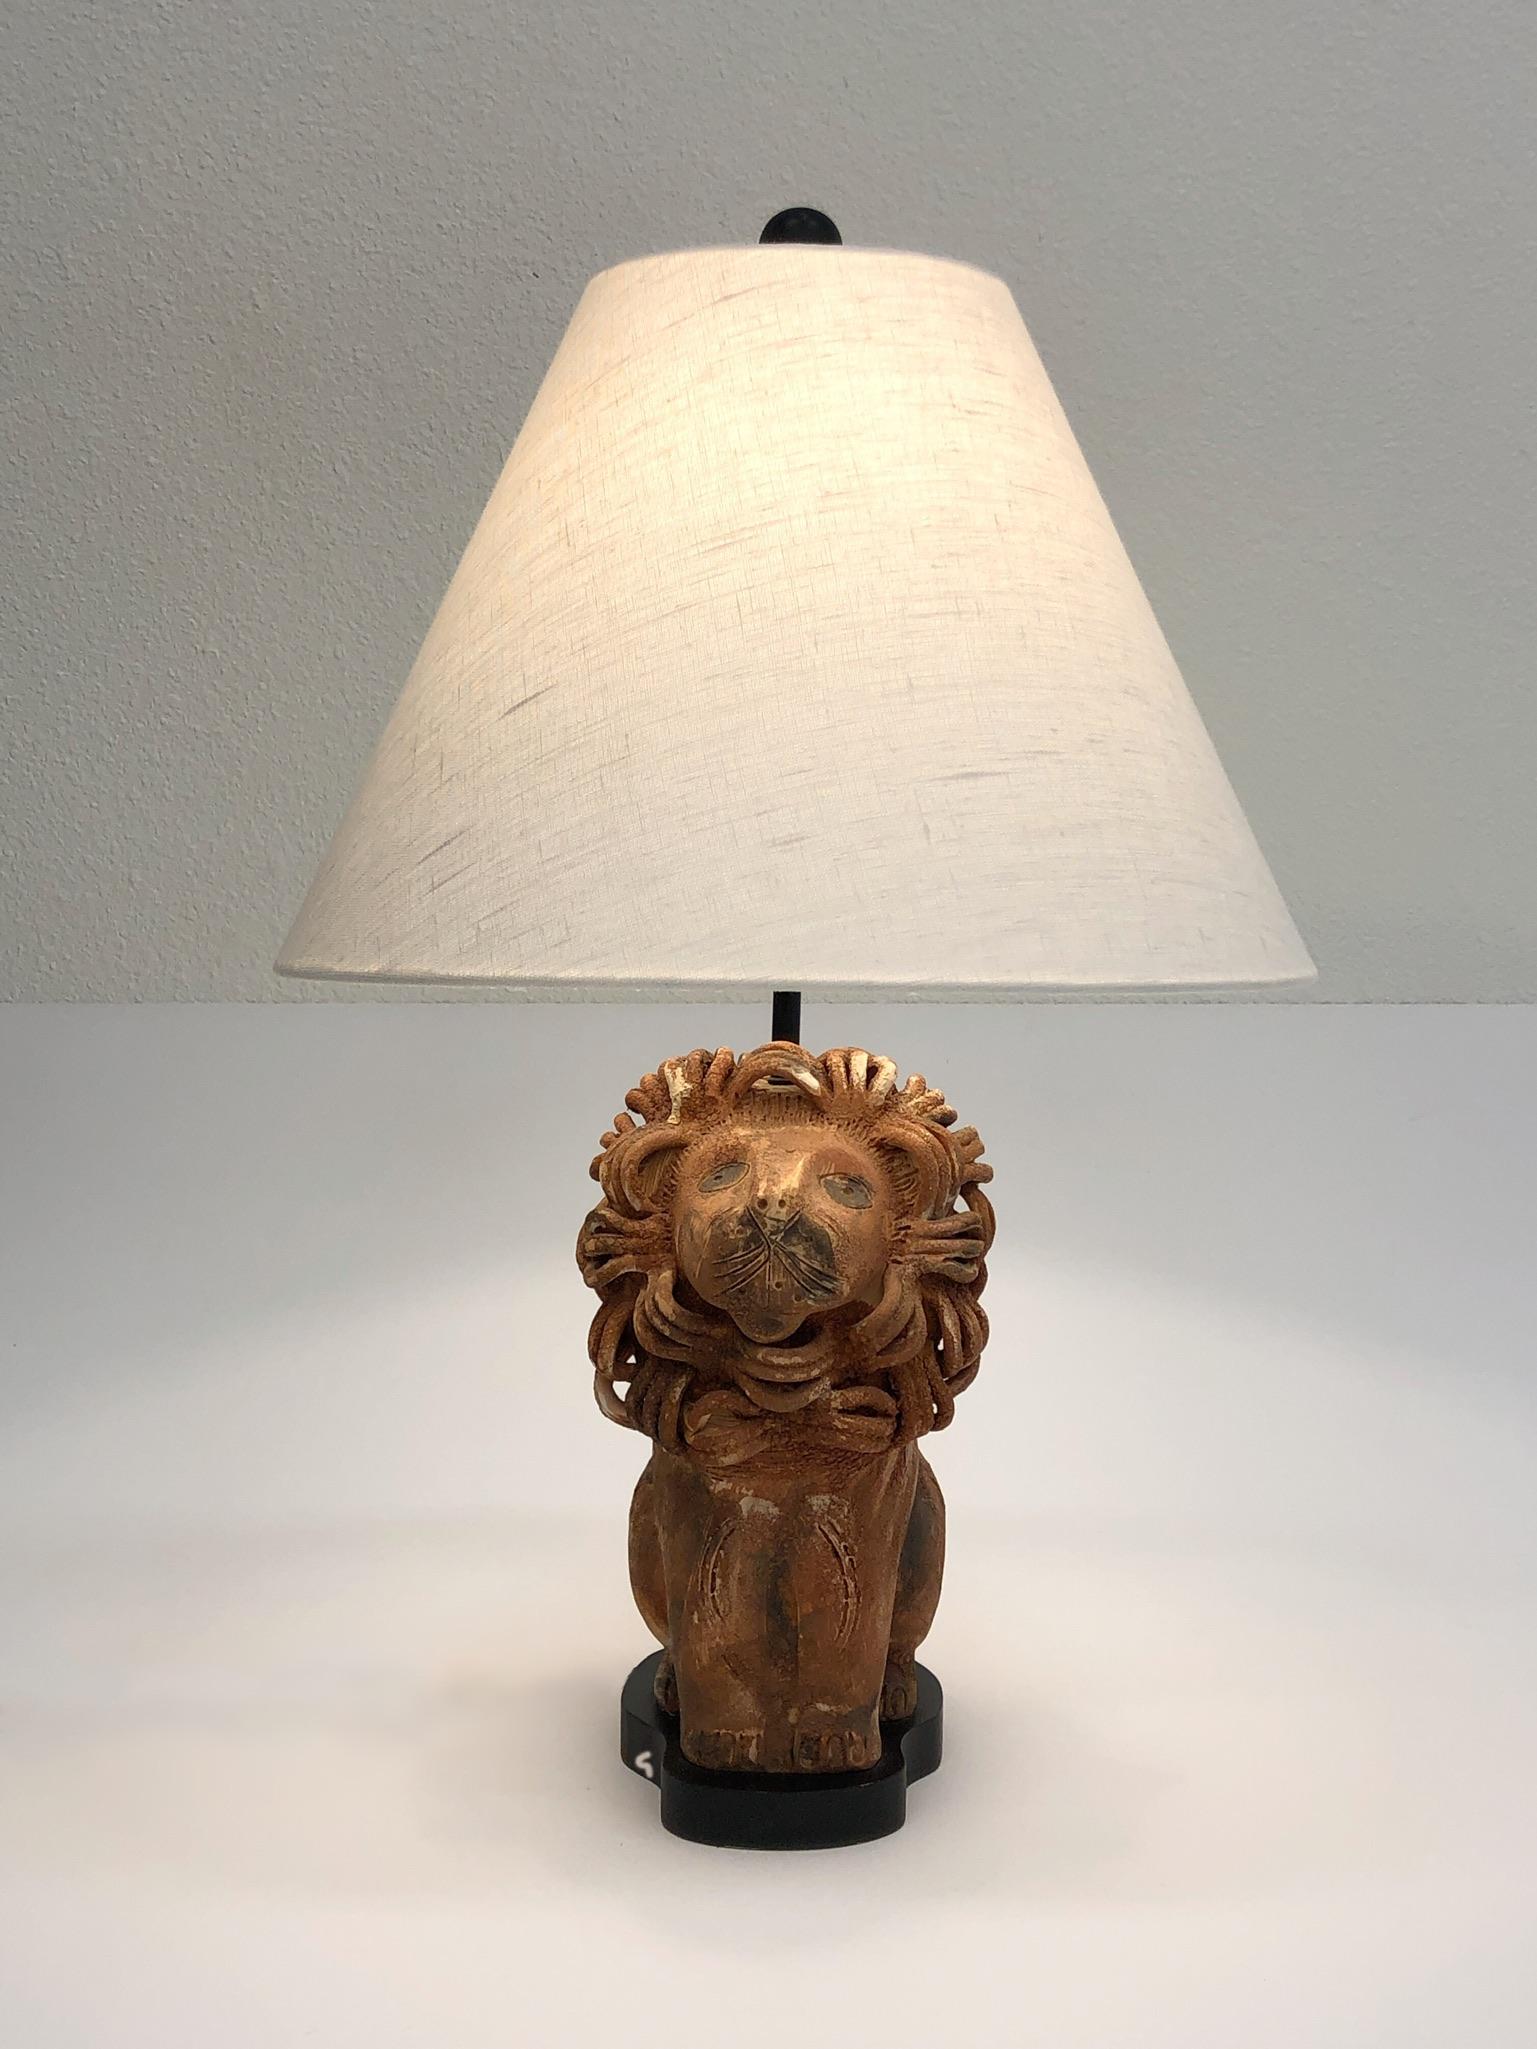 A rare Italian ceramic lion table lamp by renowned Italian ceramicist Aldo Londi for Bitossi. The lamp has a light brow volcanic glazed and black lacquer. Newly rewired and new vanilla linen shade. 

Overall dimensions: 28” high 18” diameter.